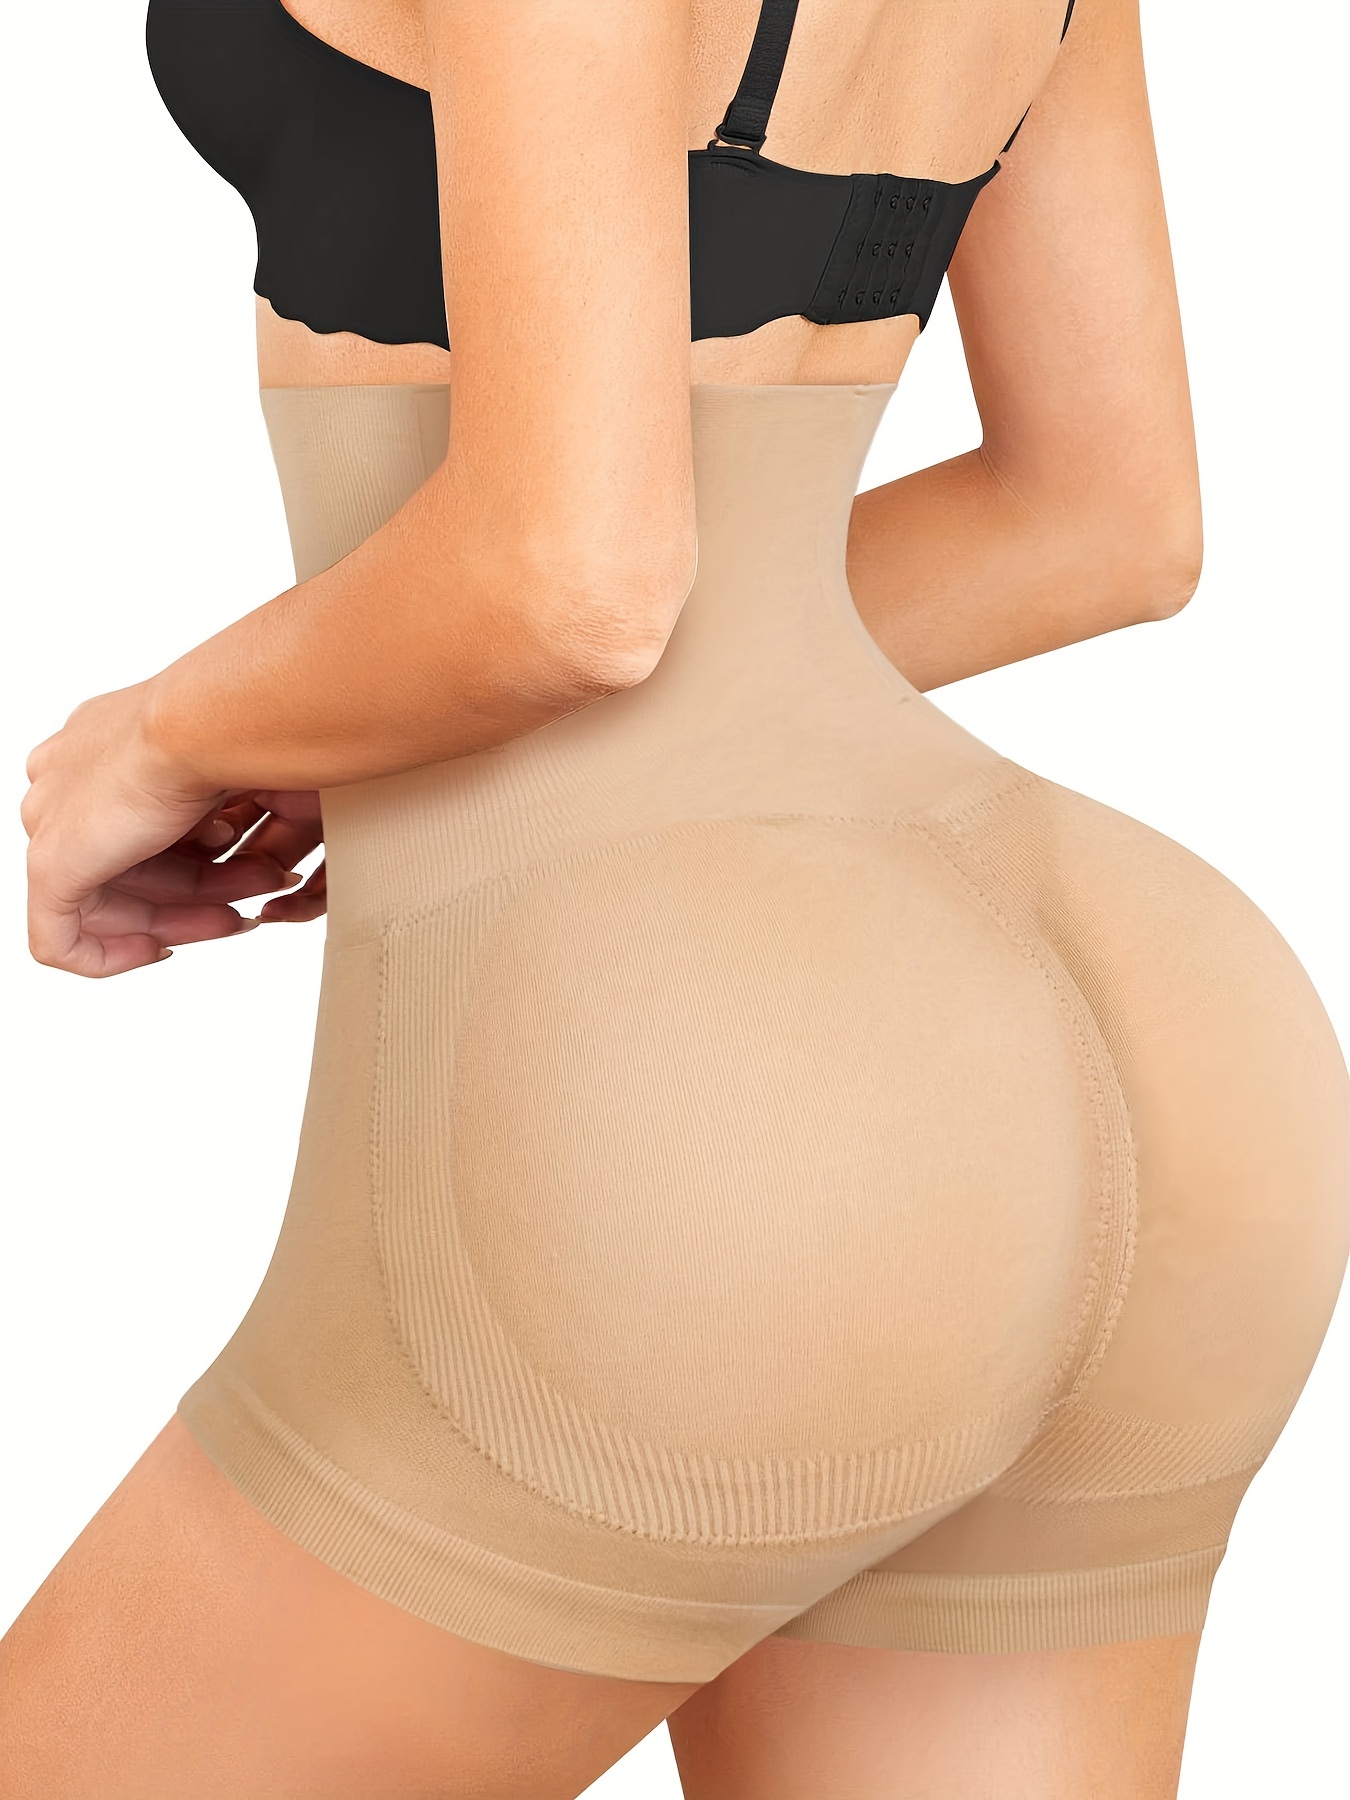 Women Butt Lifter Body Shaper Tummy Control Panties Enhancer Underwear  Girdle Booty Lace Shapewear Boy Shorts Seamless (Beige without lace, S) at   Women's Clothing store